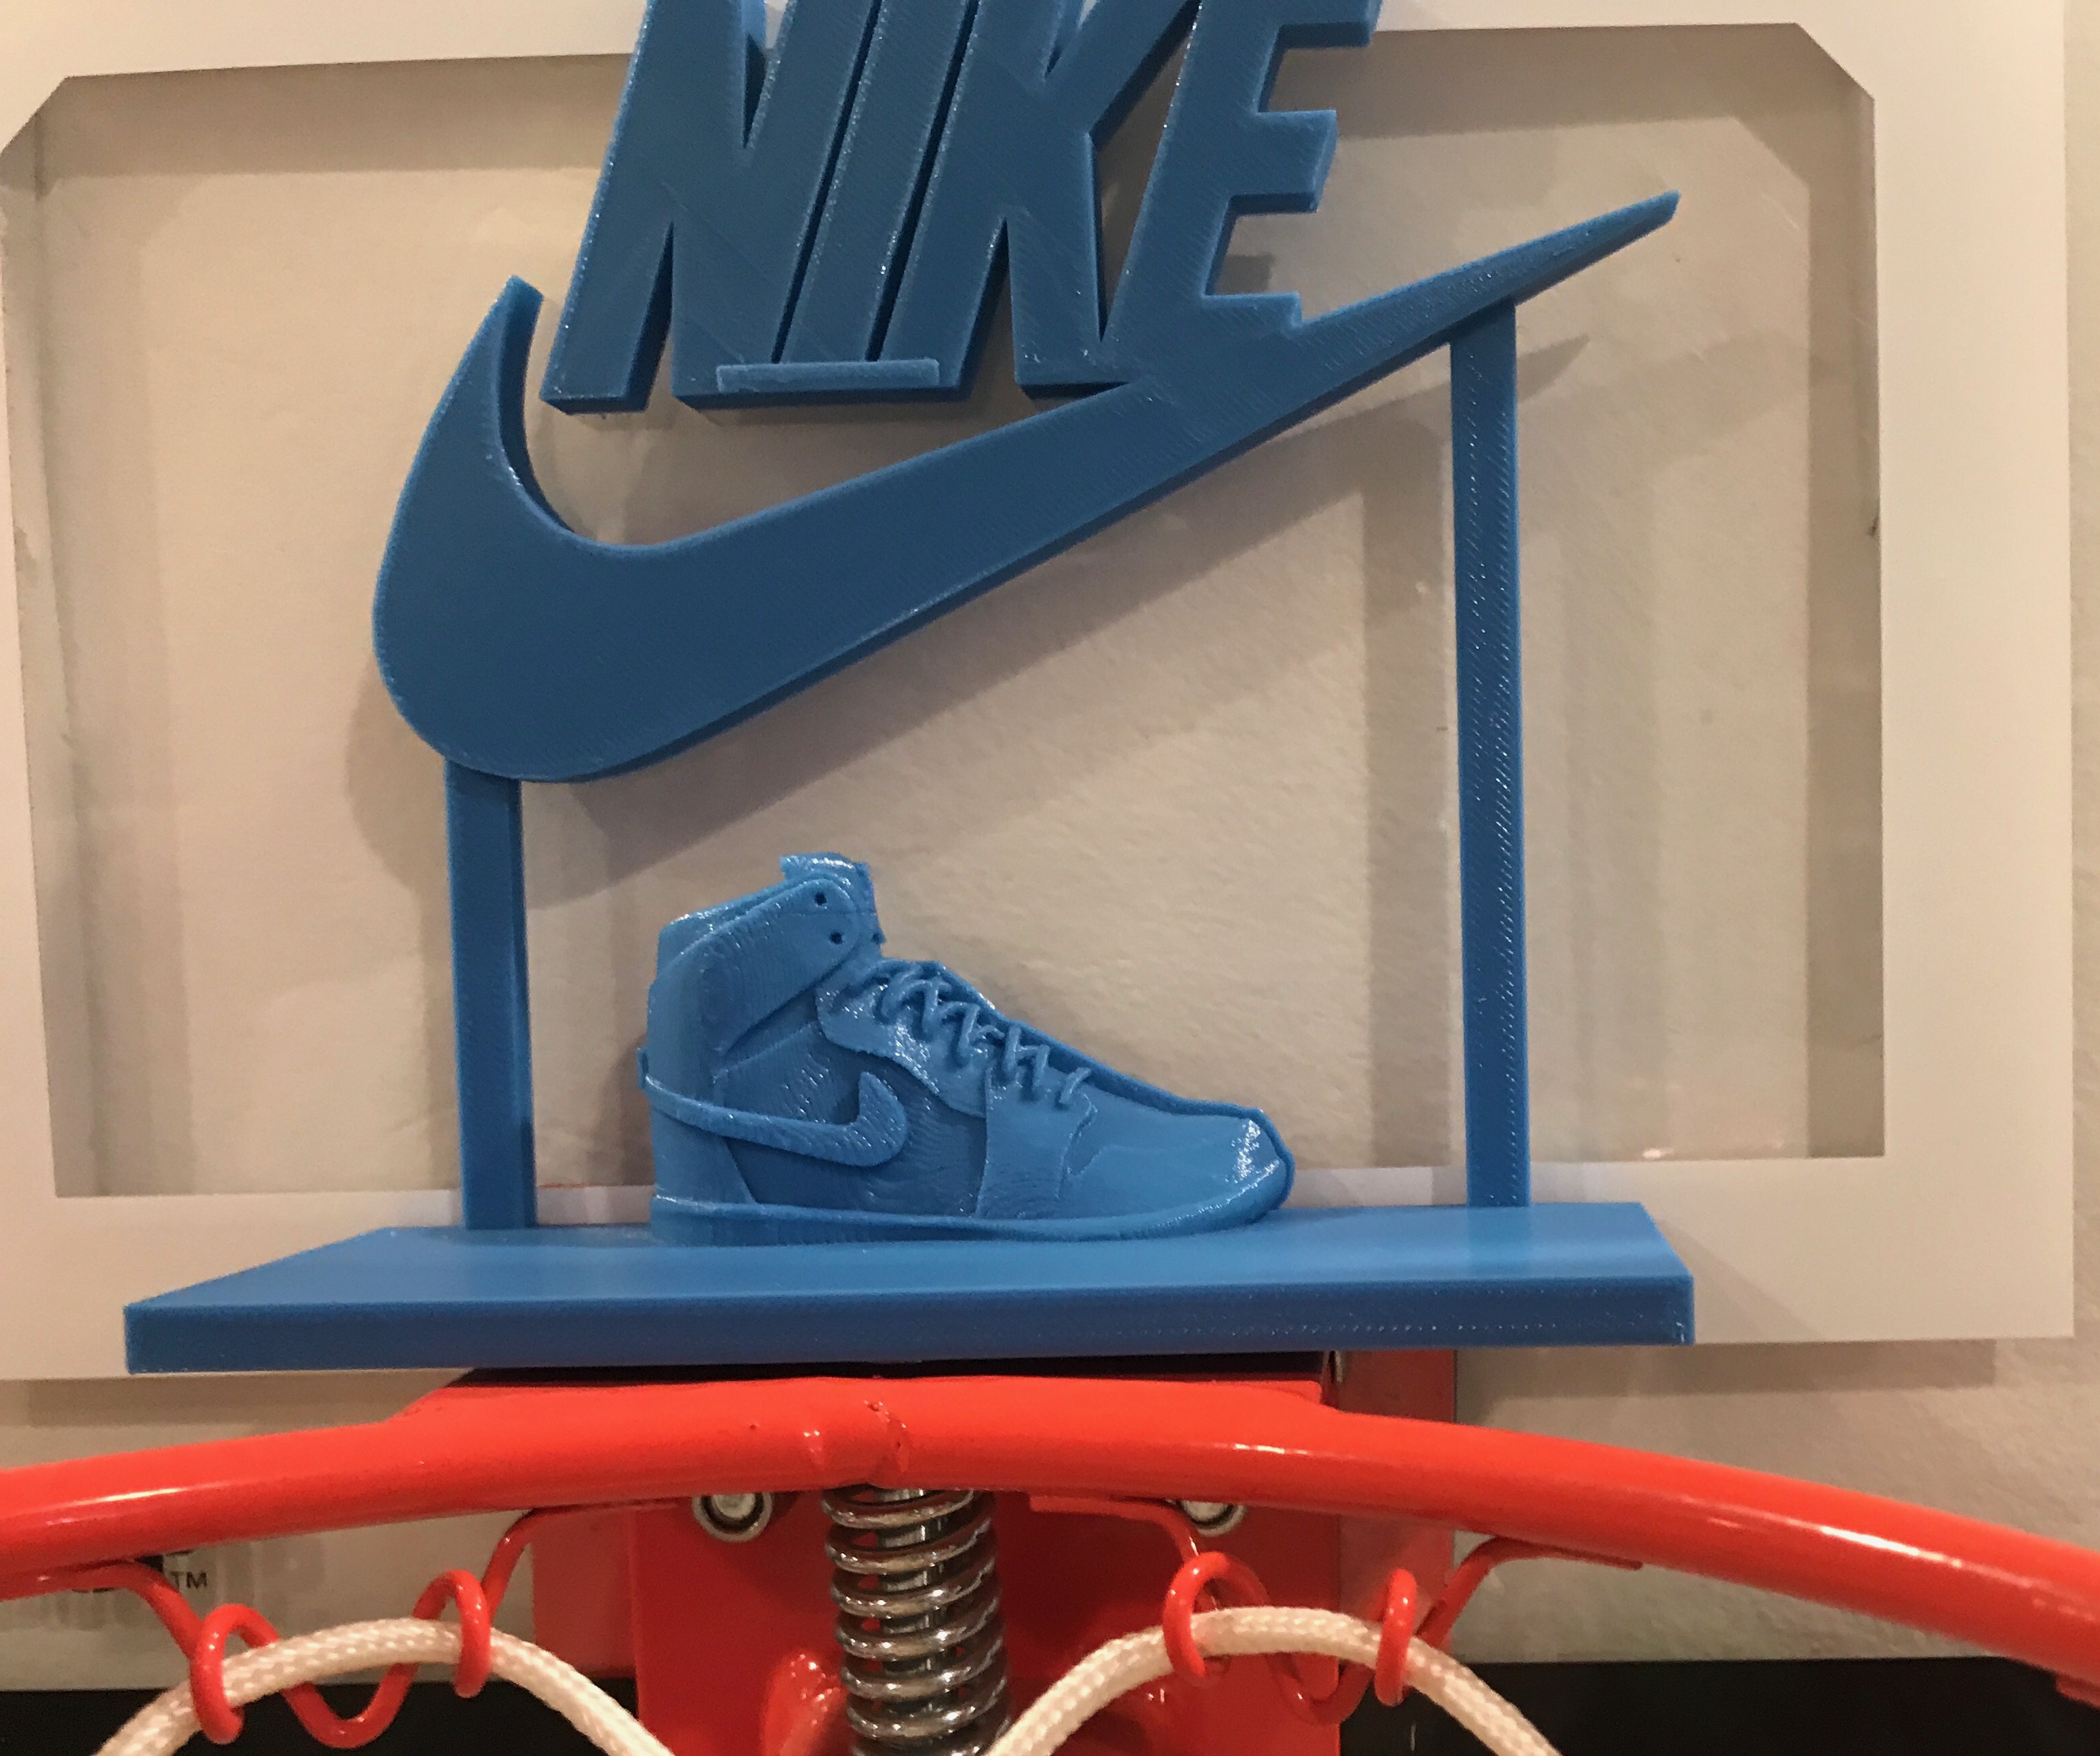 Nike Air Jordan Just Do It Display Sign Stand – So Sick With It